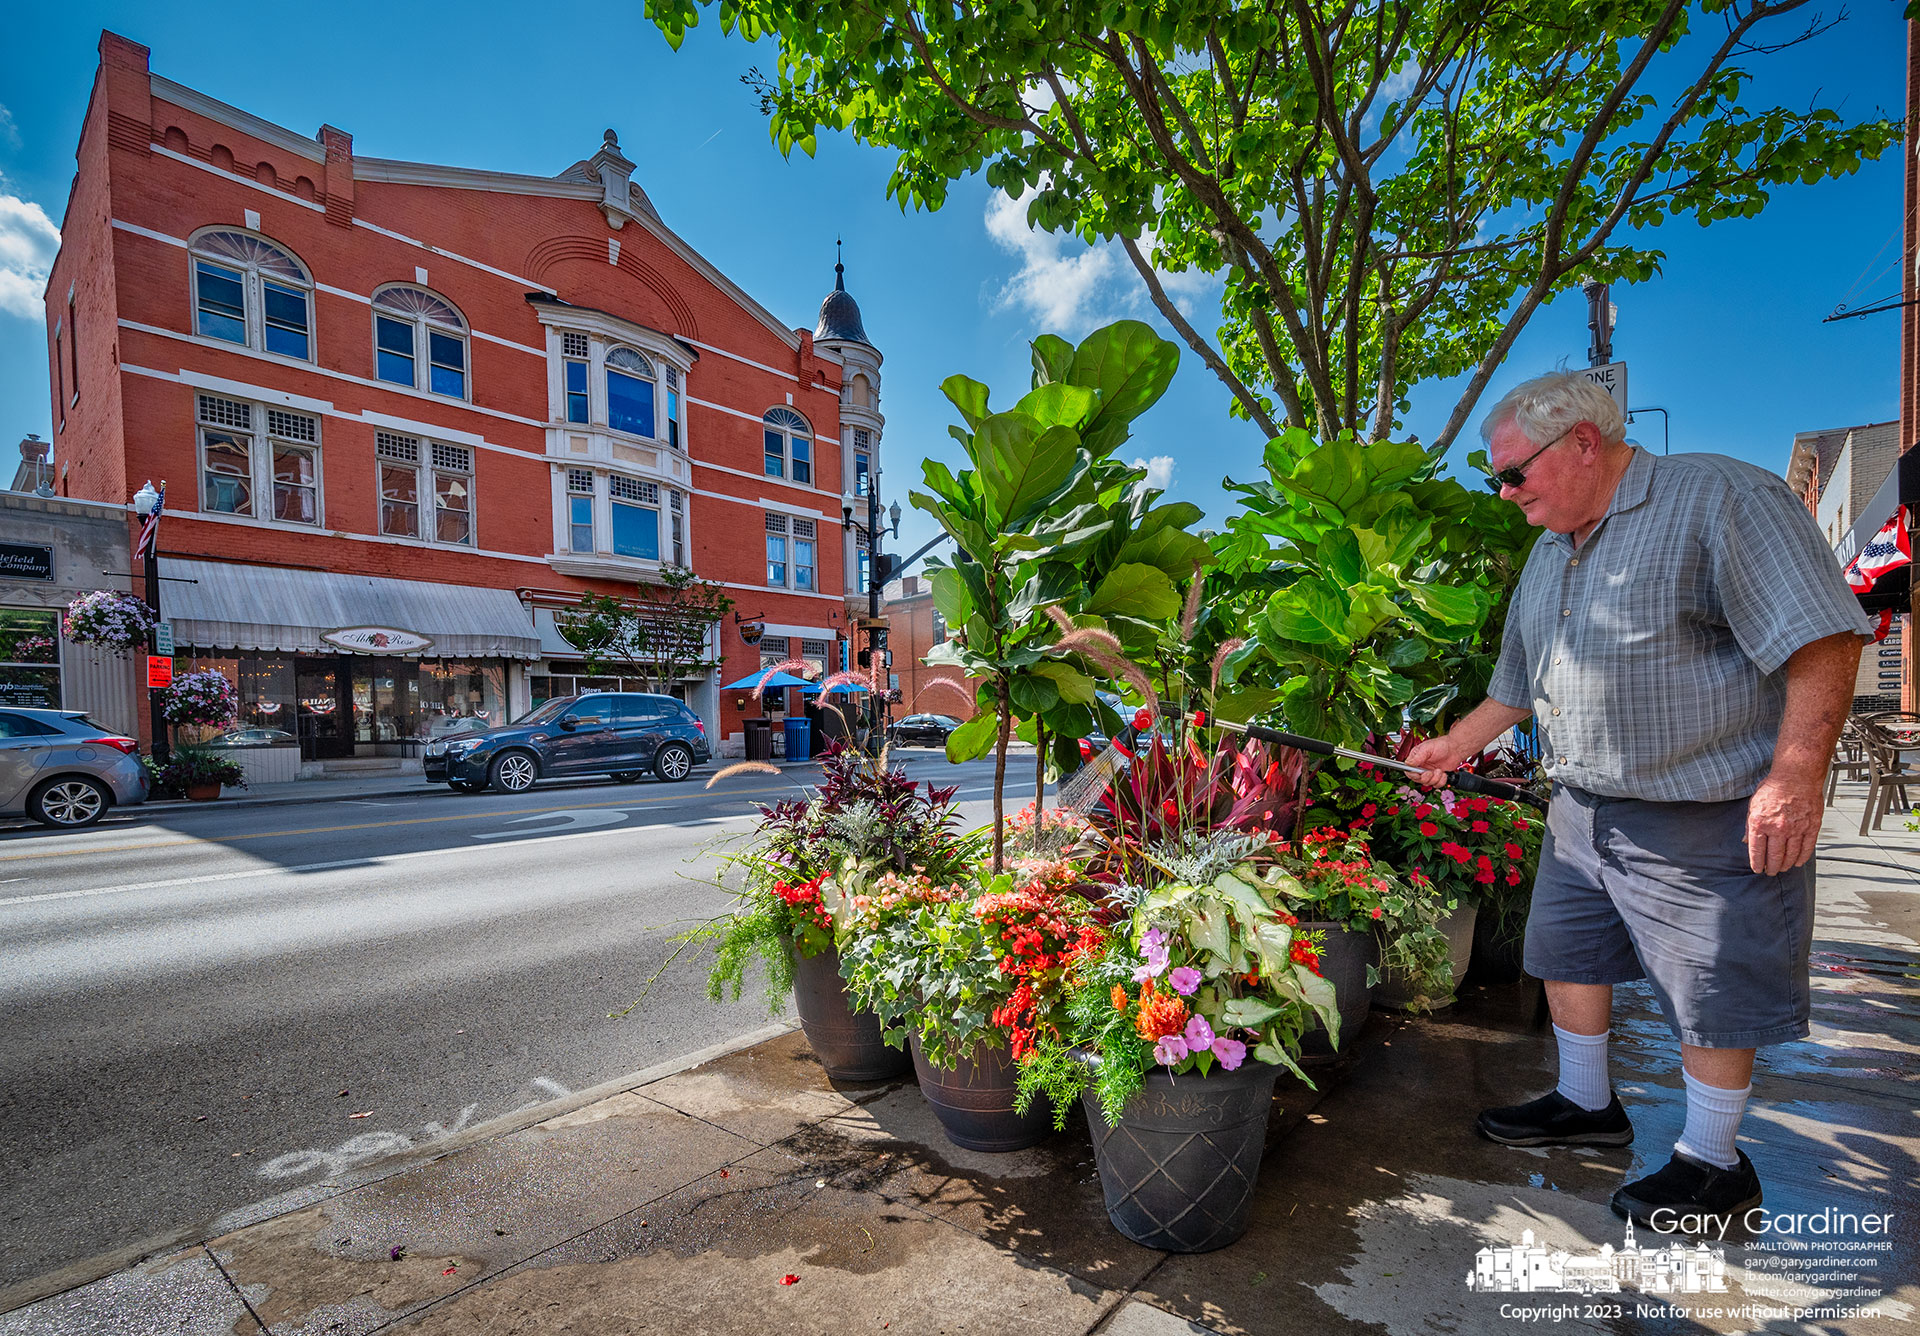 Florist Dave Talbott waters the plants and flowers he displays on the sidewalk in front of his Uptown Westerville shop creating a public garden maintained by him and his workers. My Final Photo for July 27, 2023.